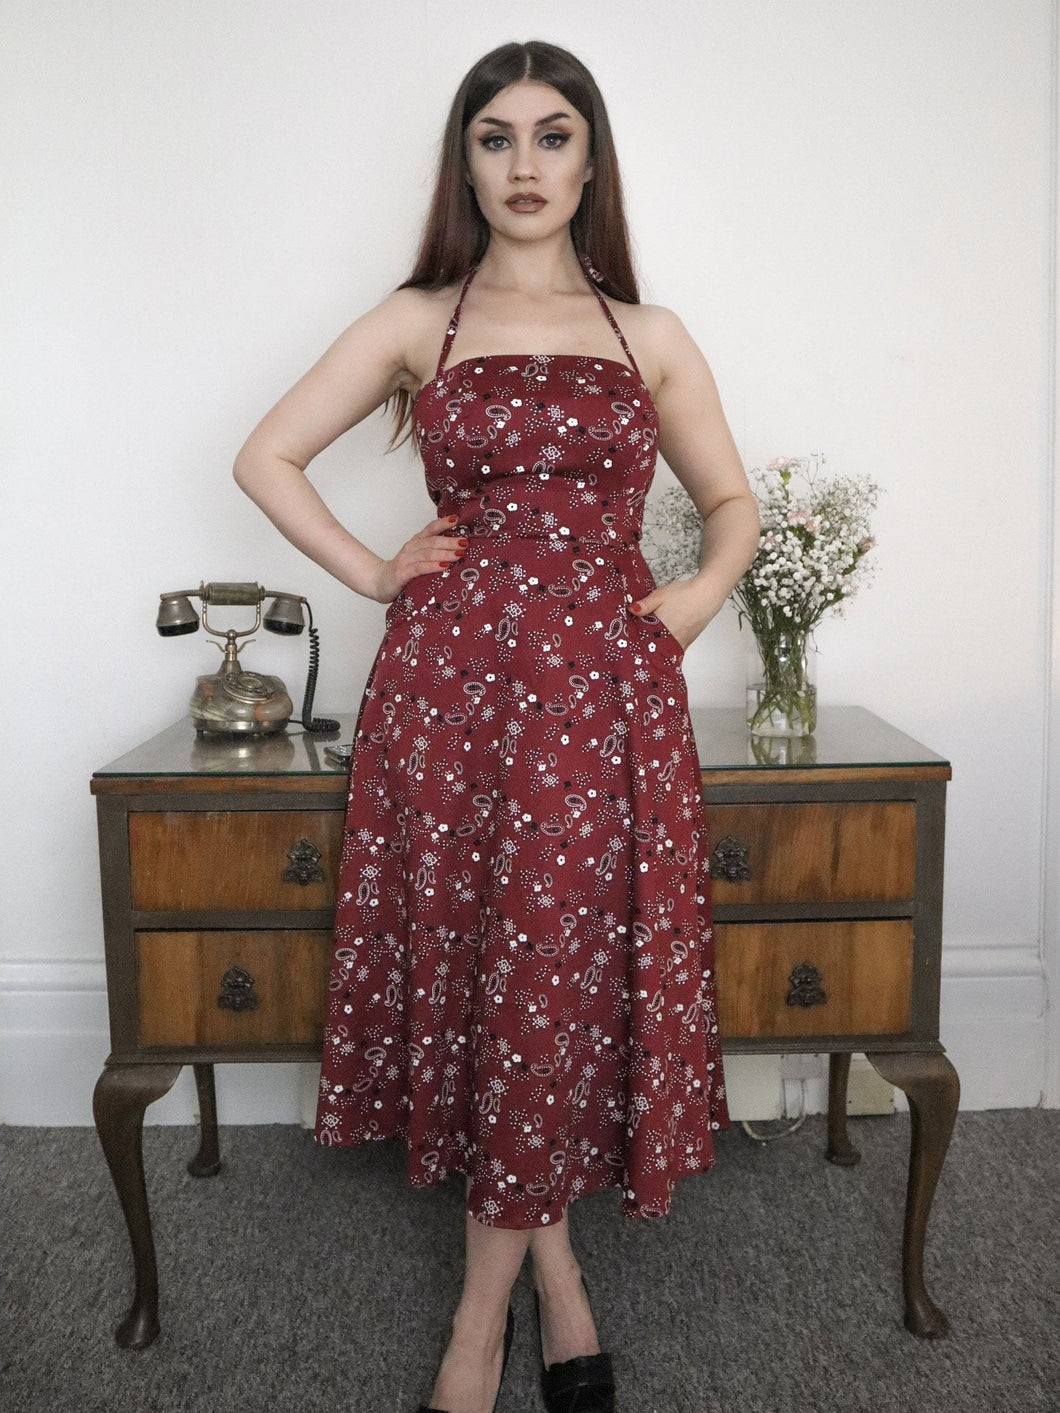 Collectif Sandy Bandana Dress Collectif Canada burgundy paisley bandana print halter dress with full skirt retro vintage 90s 50s pinup swing dress Canadian Pin-Up Shop Suzie's Bombshell Boutique